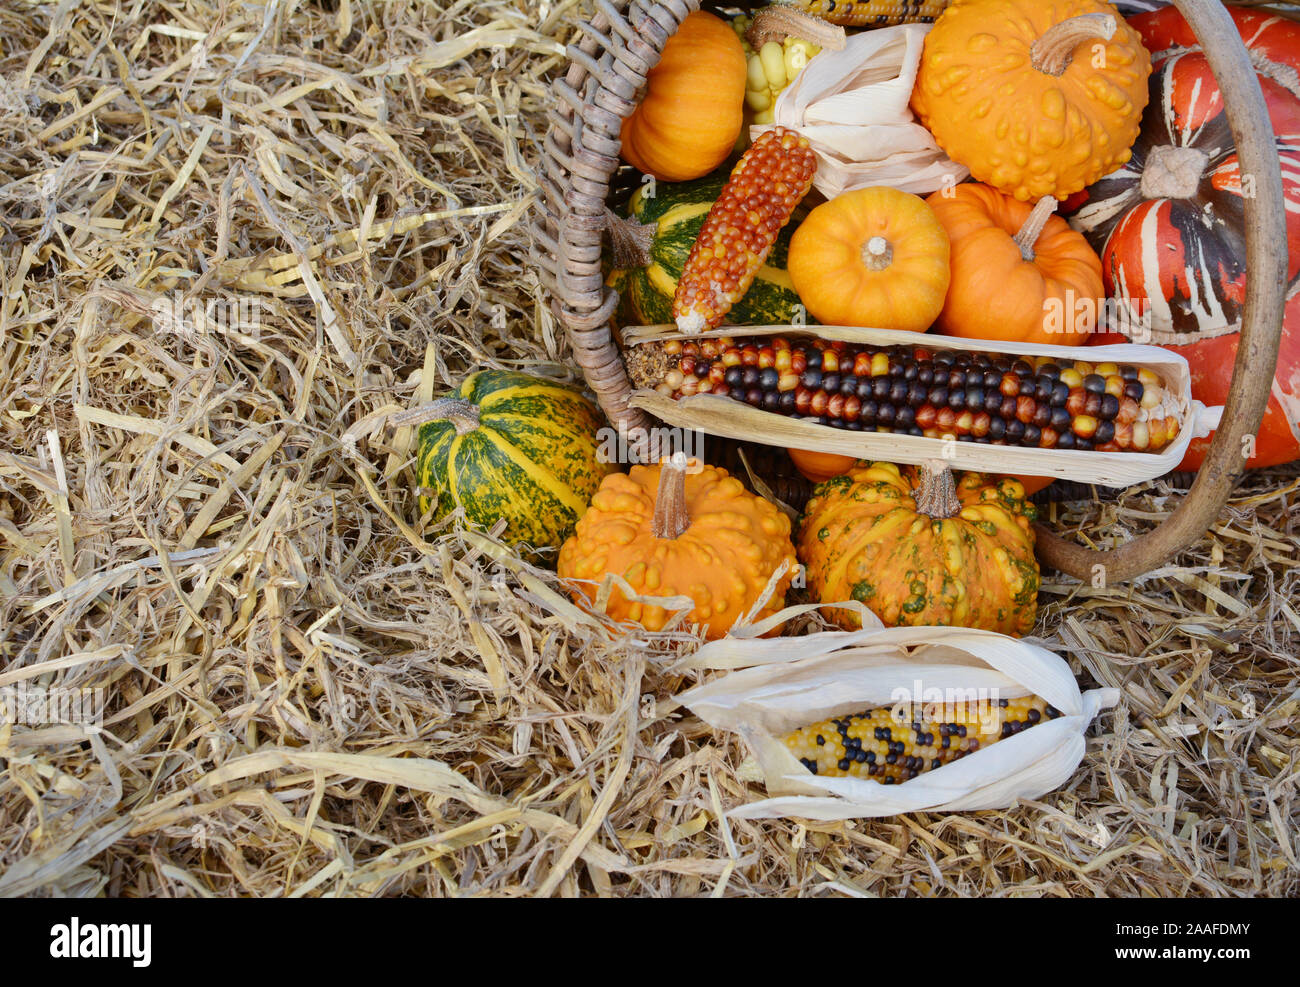 Woven basket full of Thanksgiving ornamental gourds and squash, with flint corn overflowing onto pile of hay Stock Photo